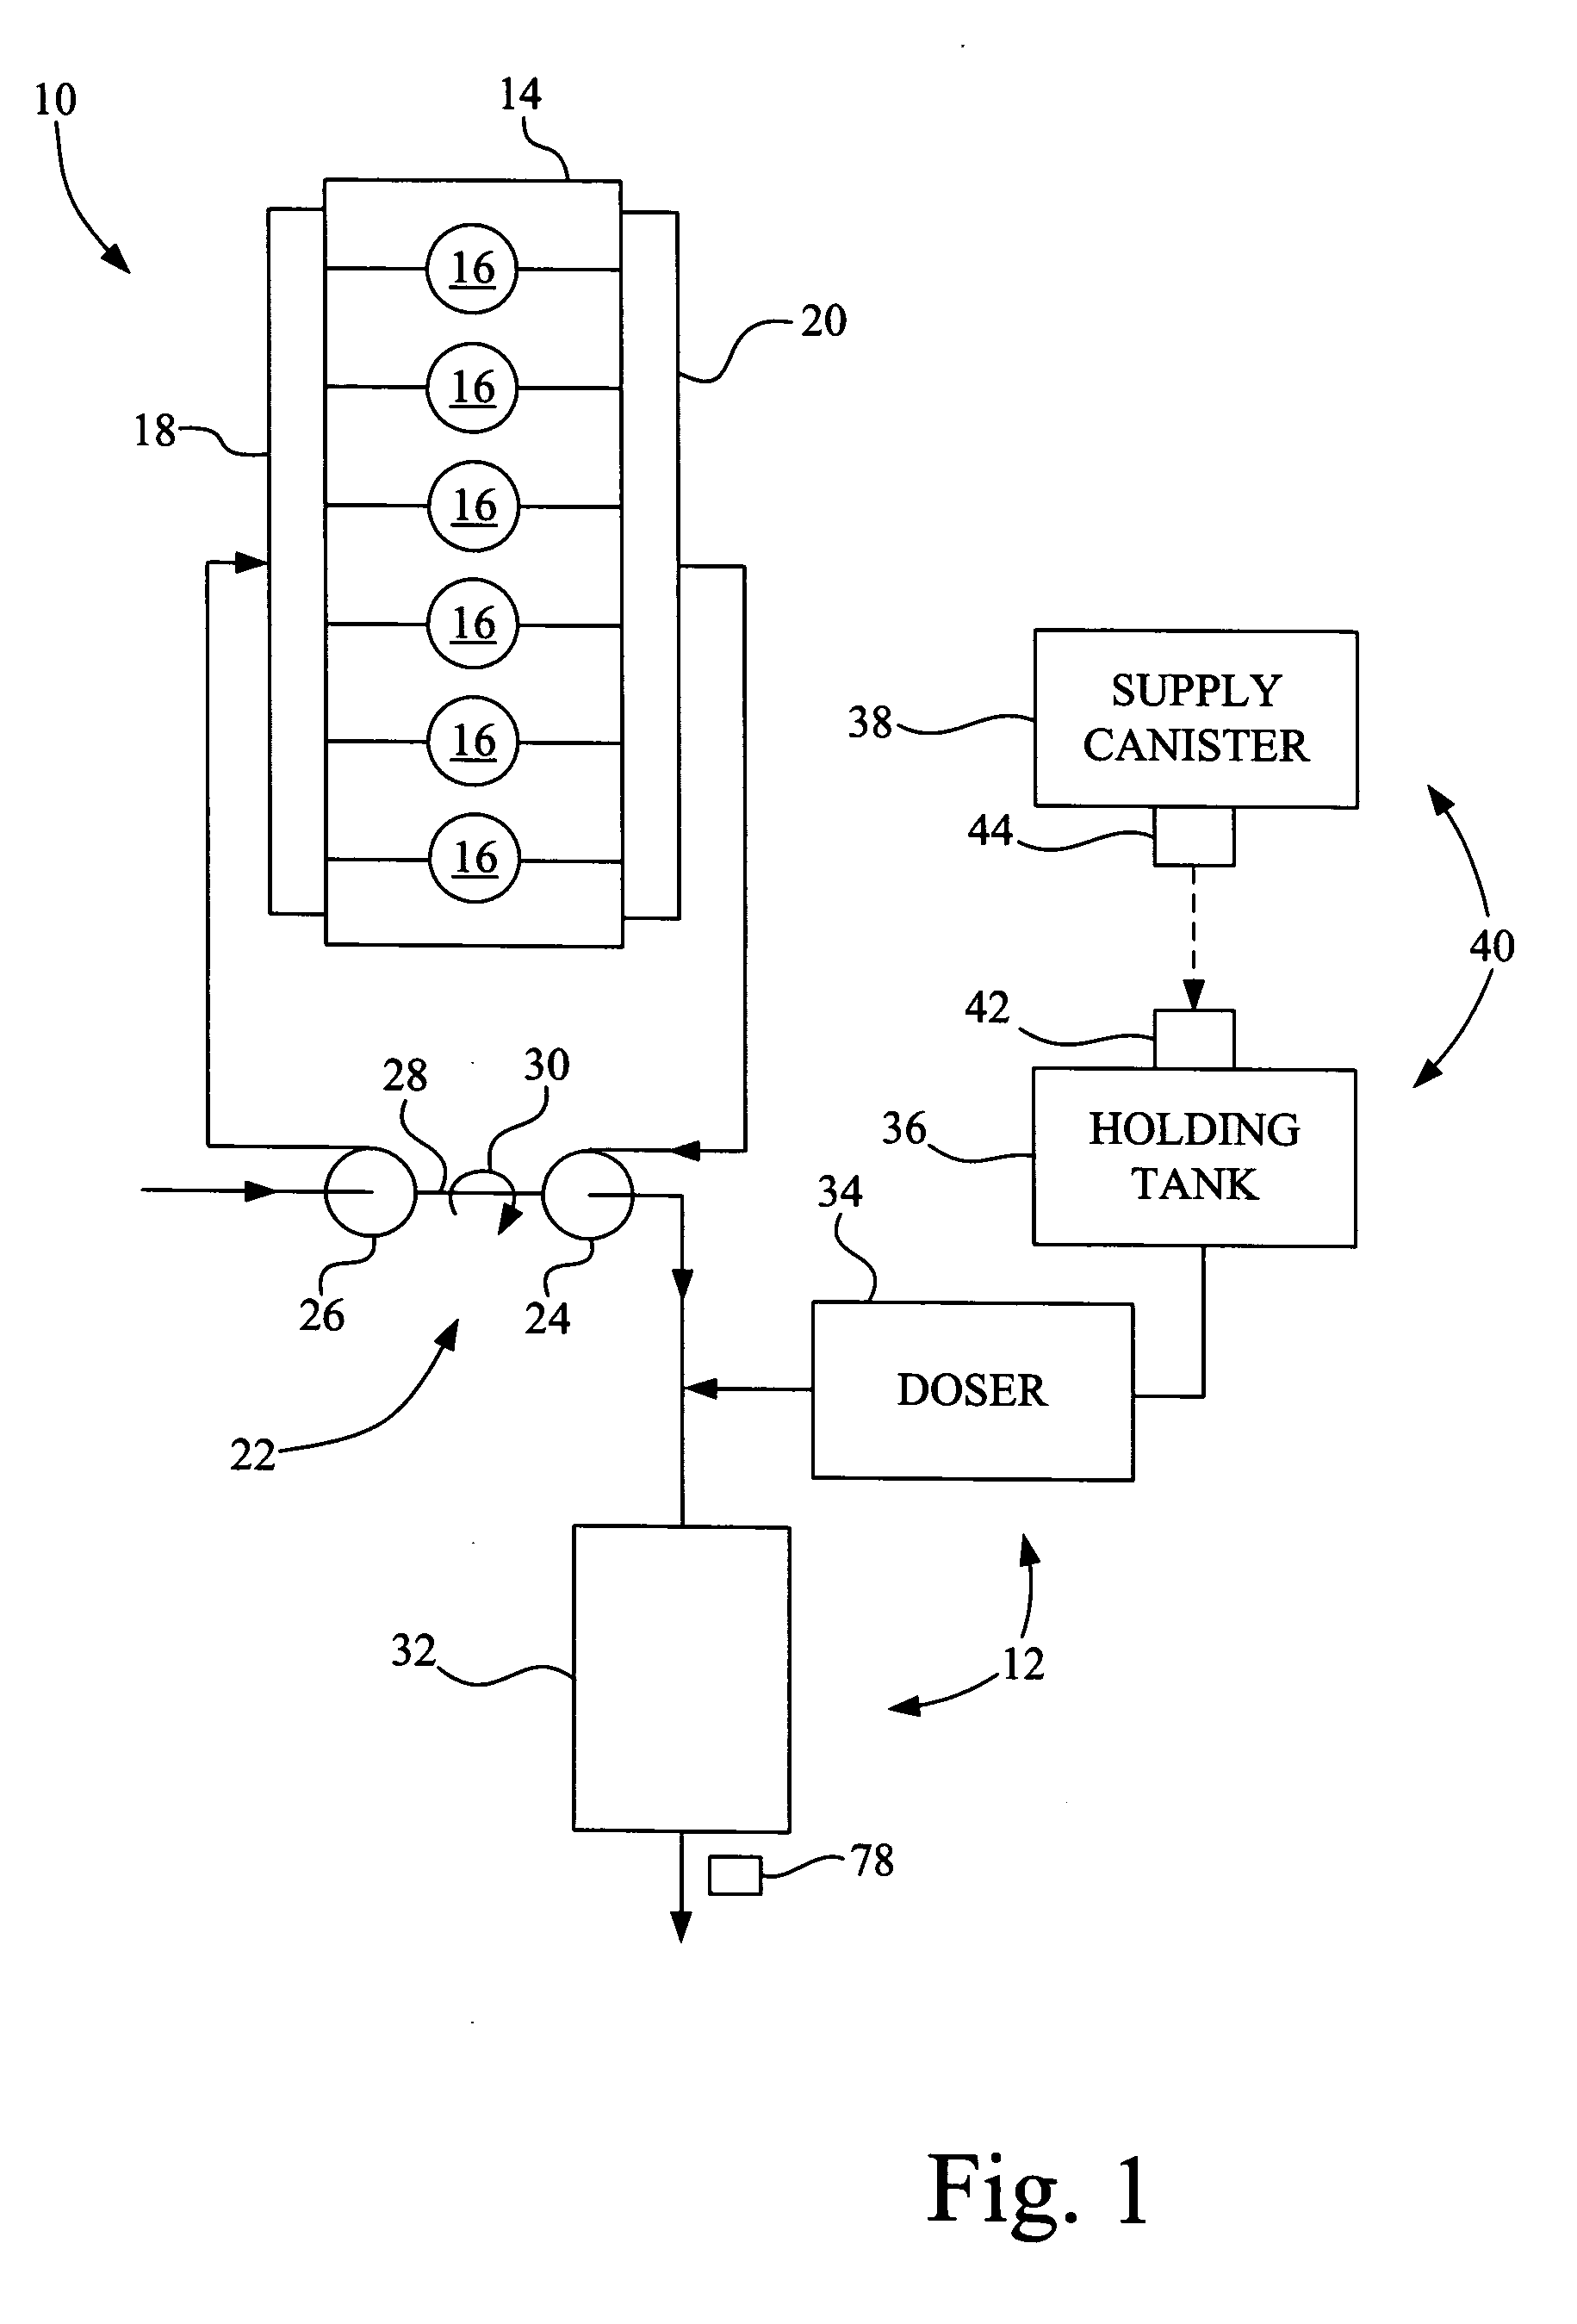 Reagent refill and supply system for an SCR exhaust aftertreatment system